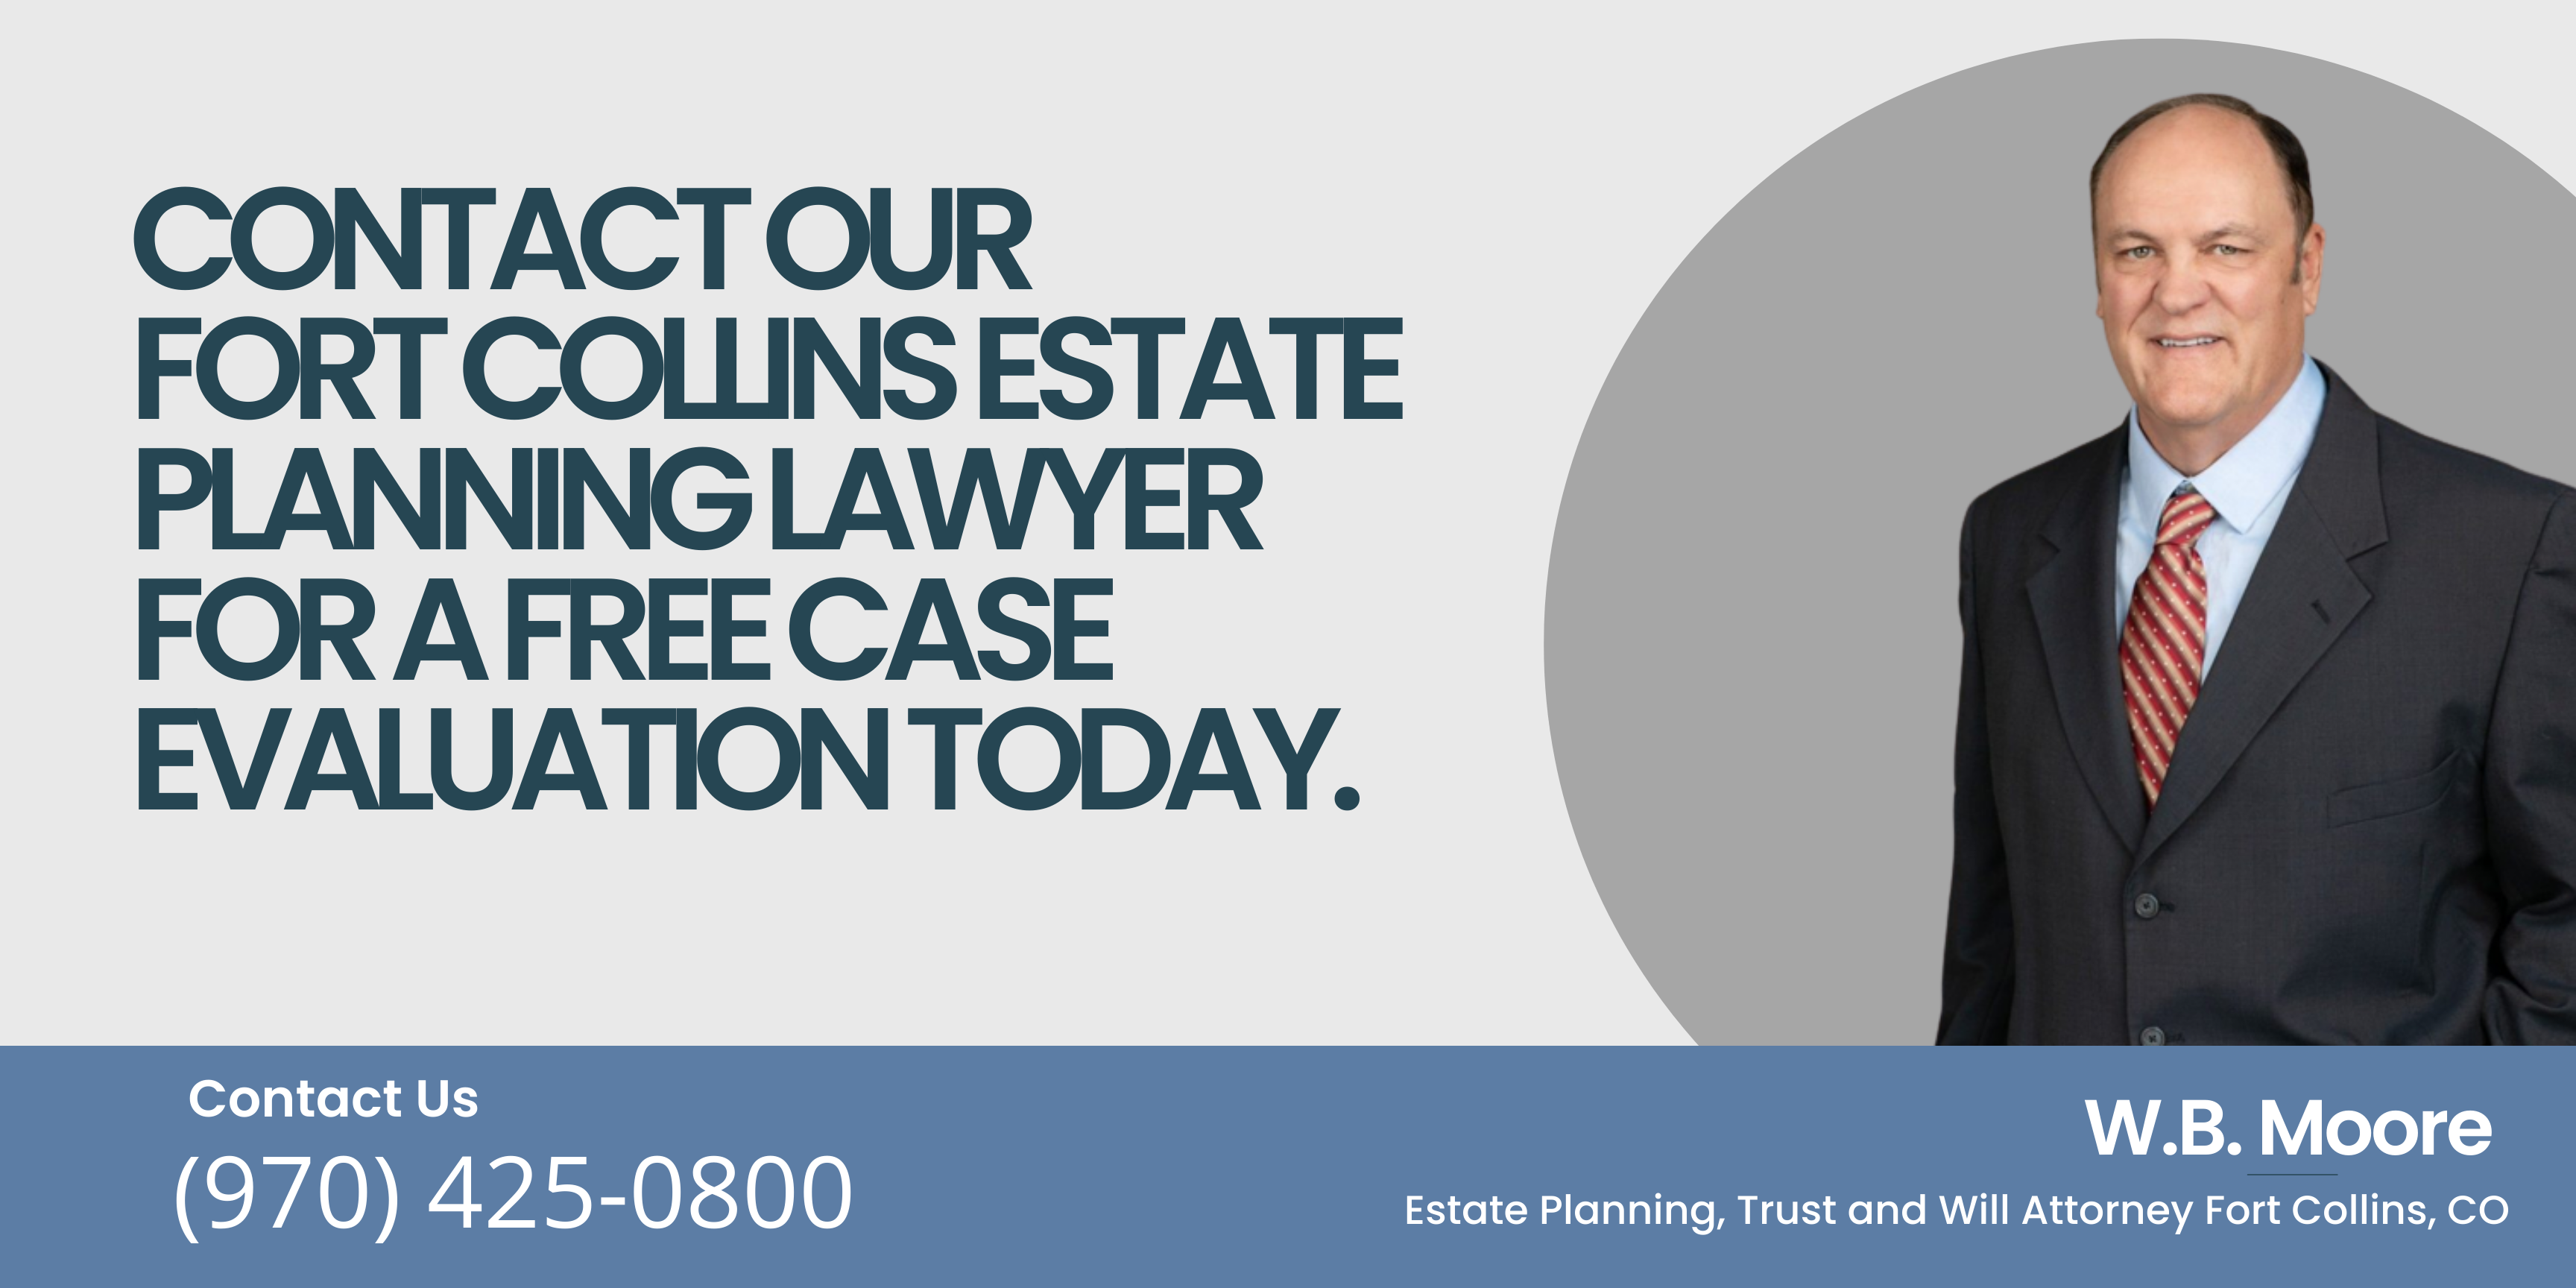 contact our Fort Collins Estate Planning Lawyer